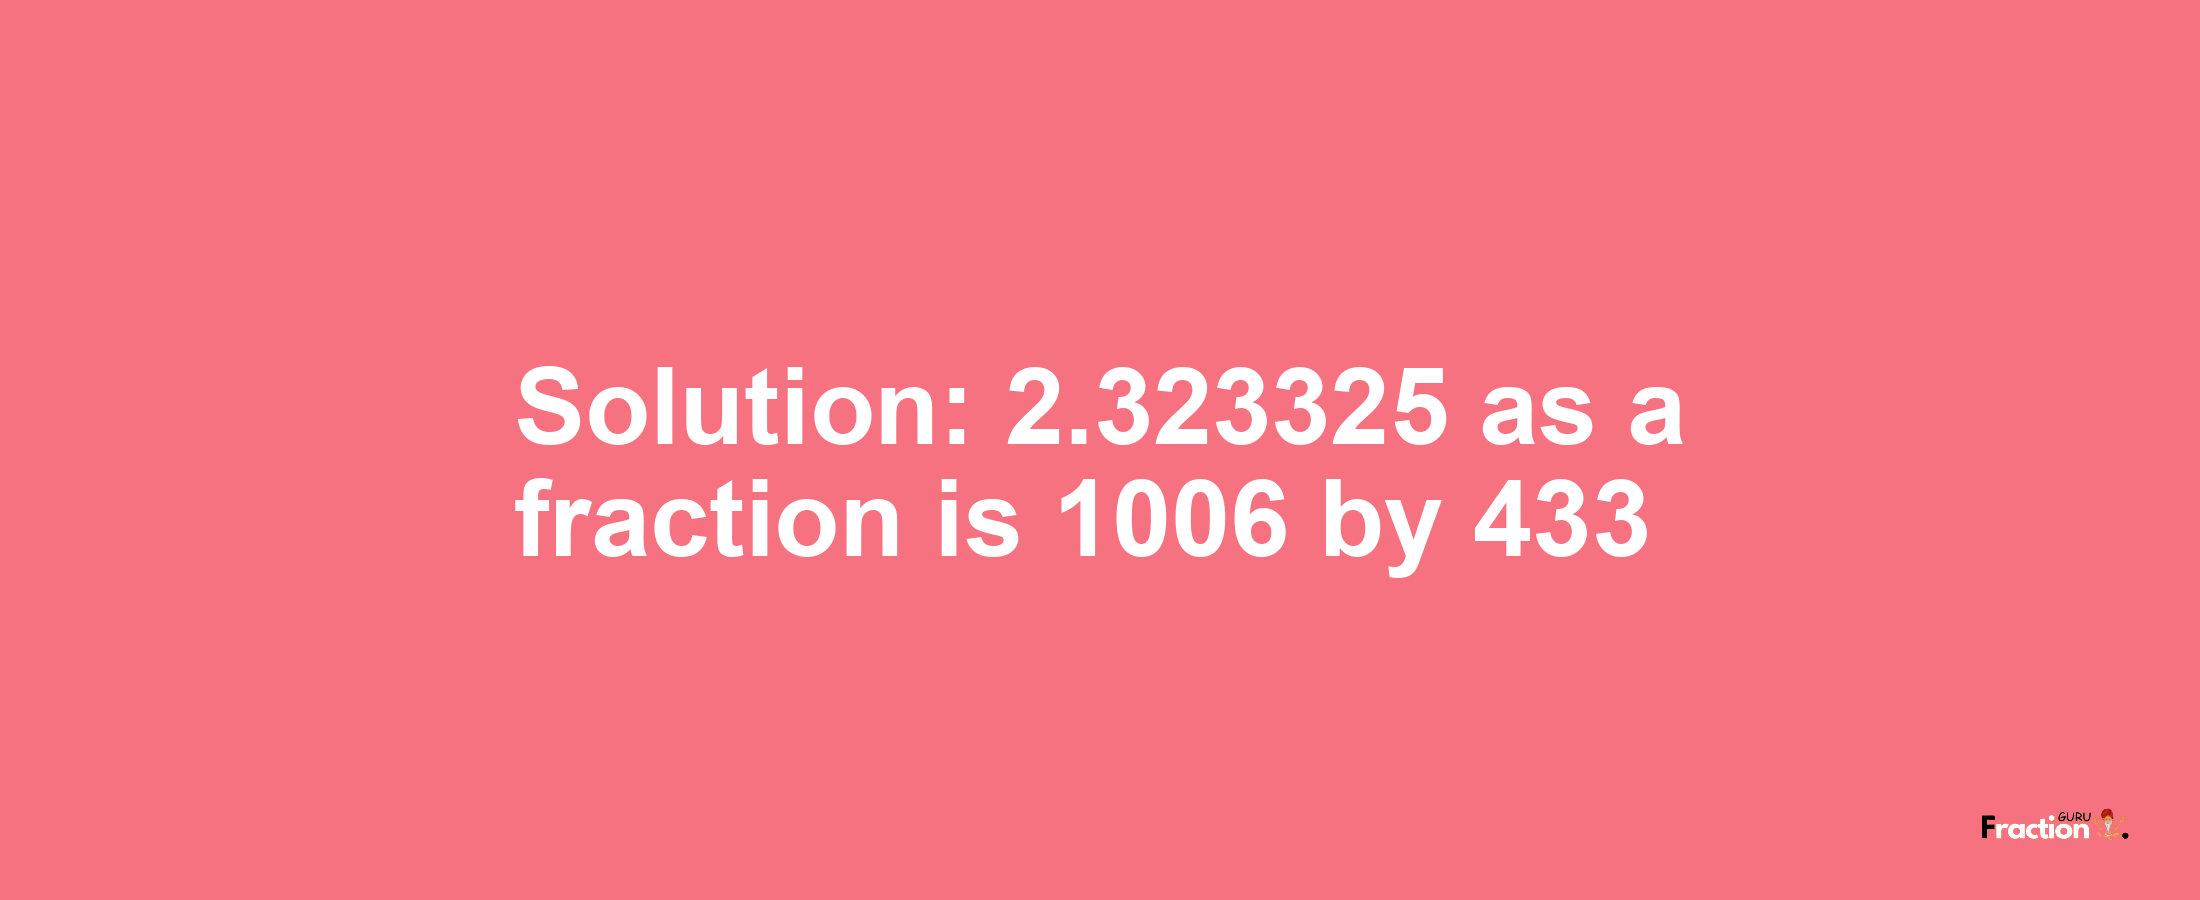 Solution:2.323325 as a fraction is 1006/433